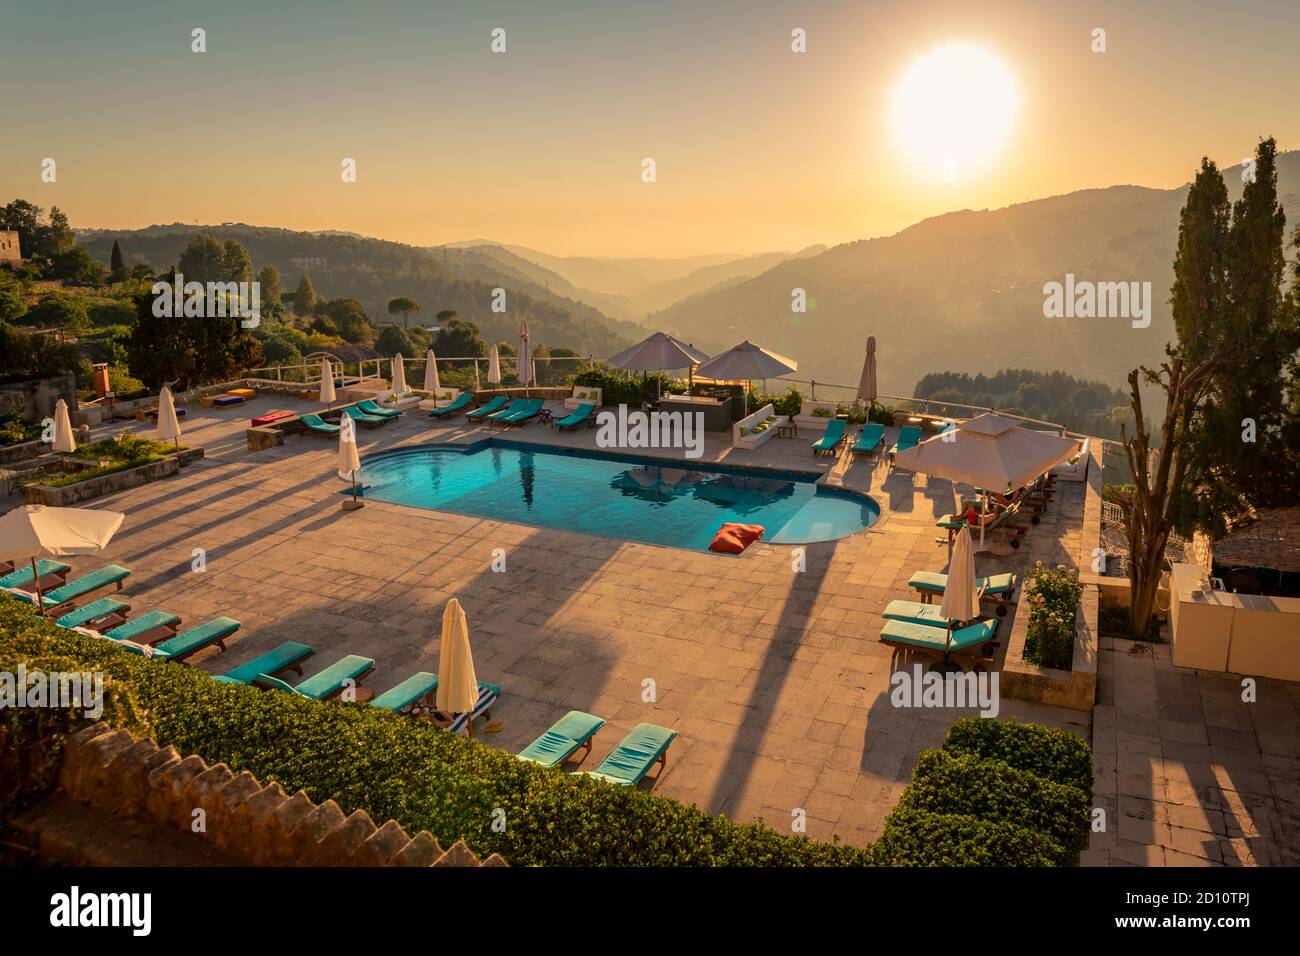 Traveling Lebanon. Pool with Refreshing Water in the Mild Sunset Light. Beautiful Resort in the Heart of the Mountains. Stock Photo